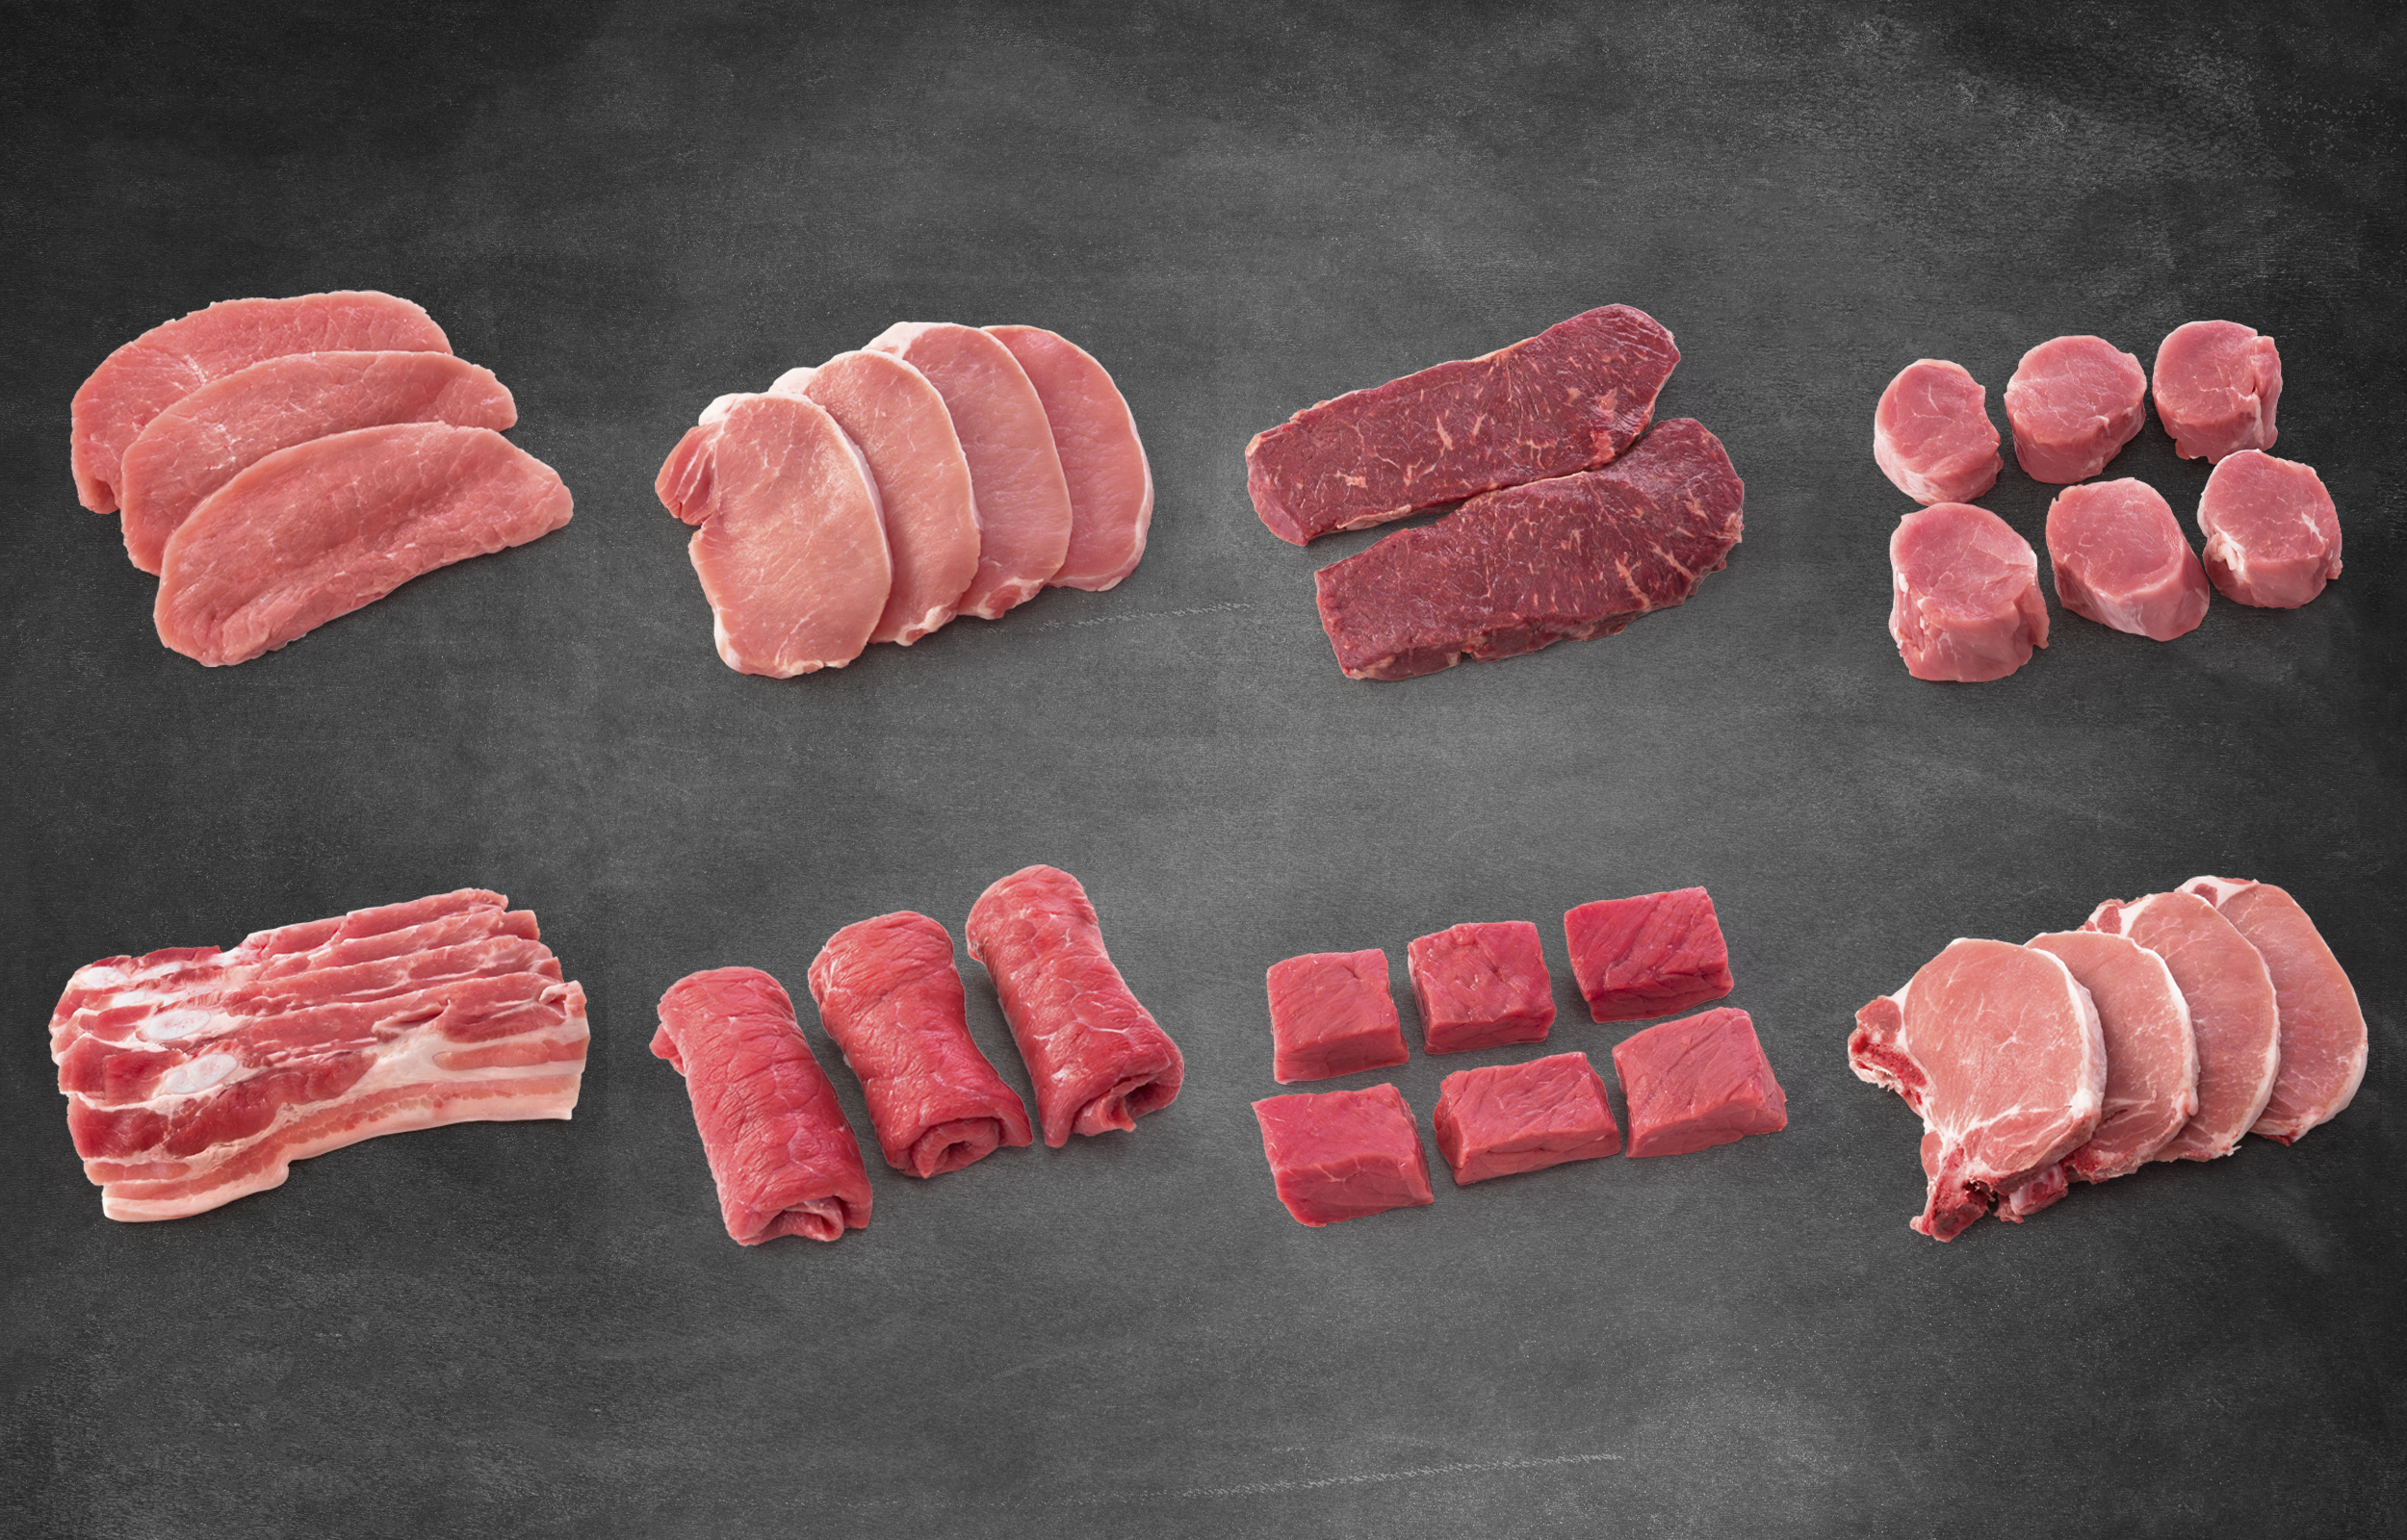 The V-Cut 240 is the first choice for flexible fresh meat portioning in Latin America